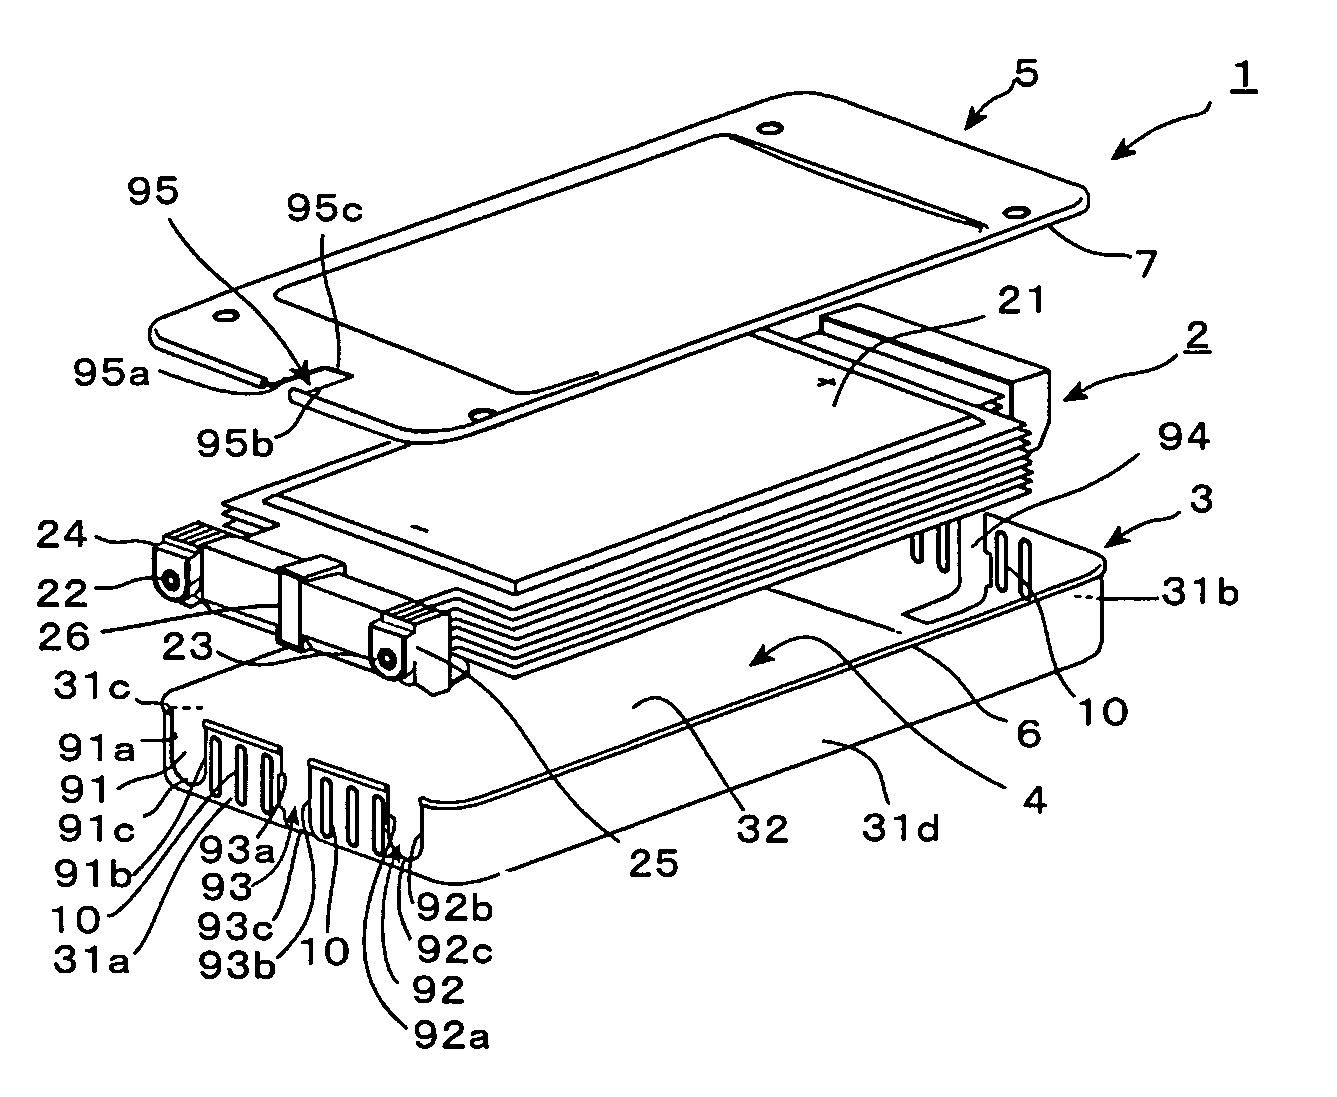 Battery outer case for receiving a flat battery pack joined by seam-rolling